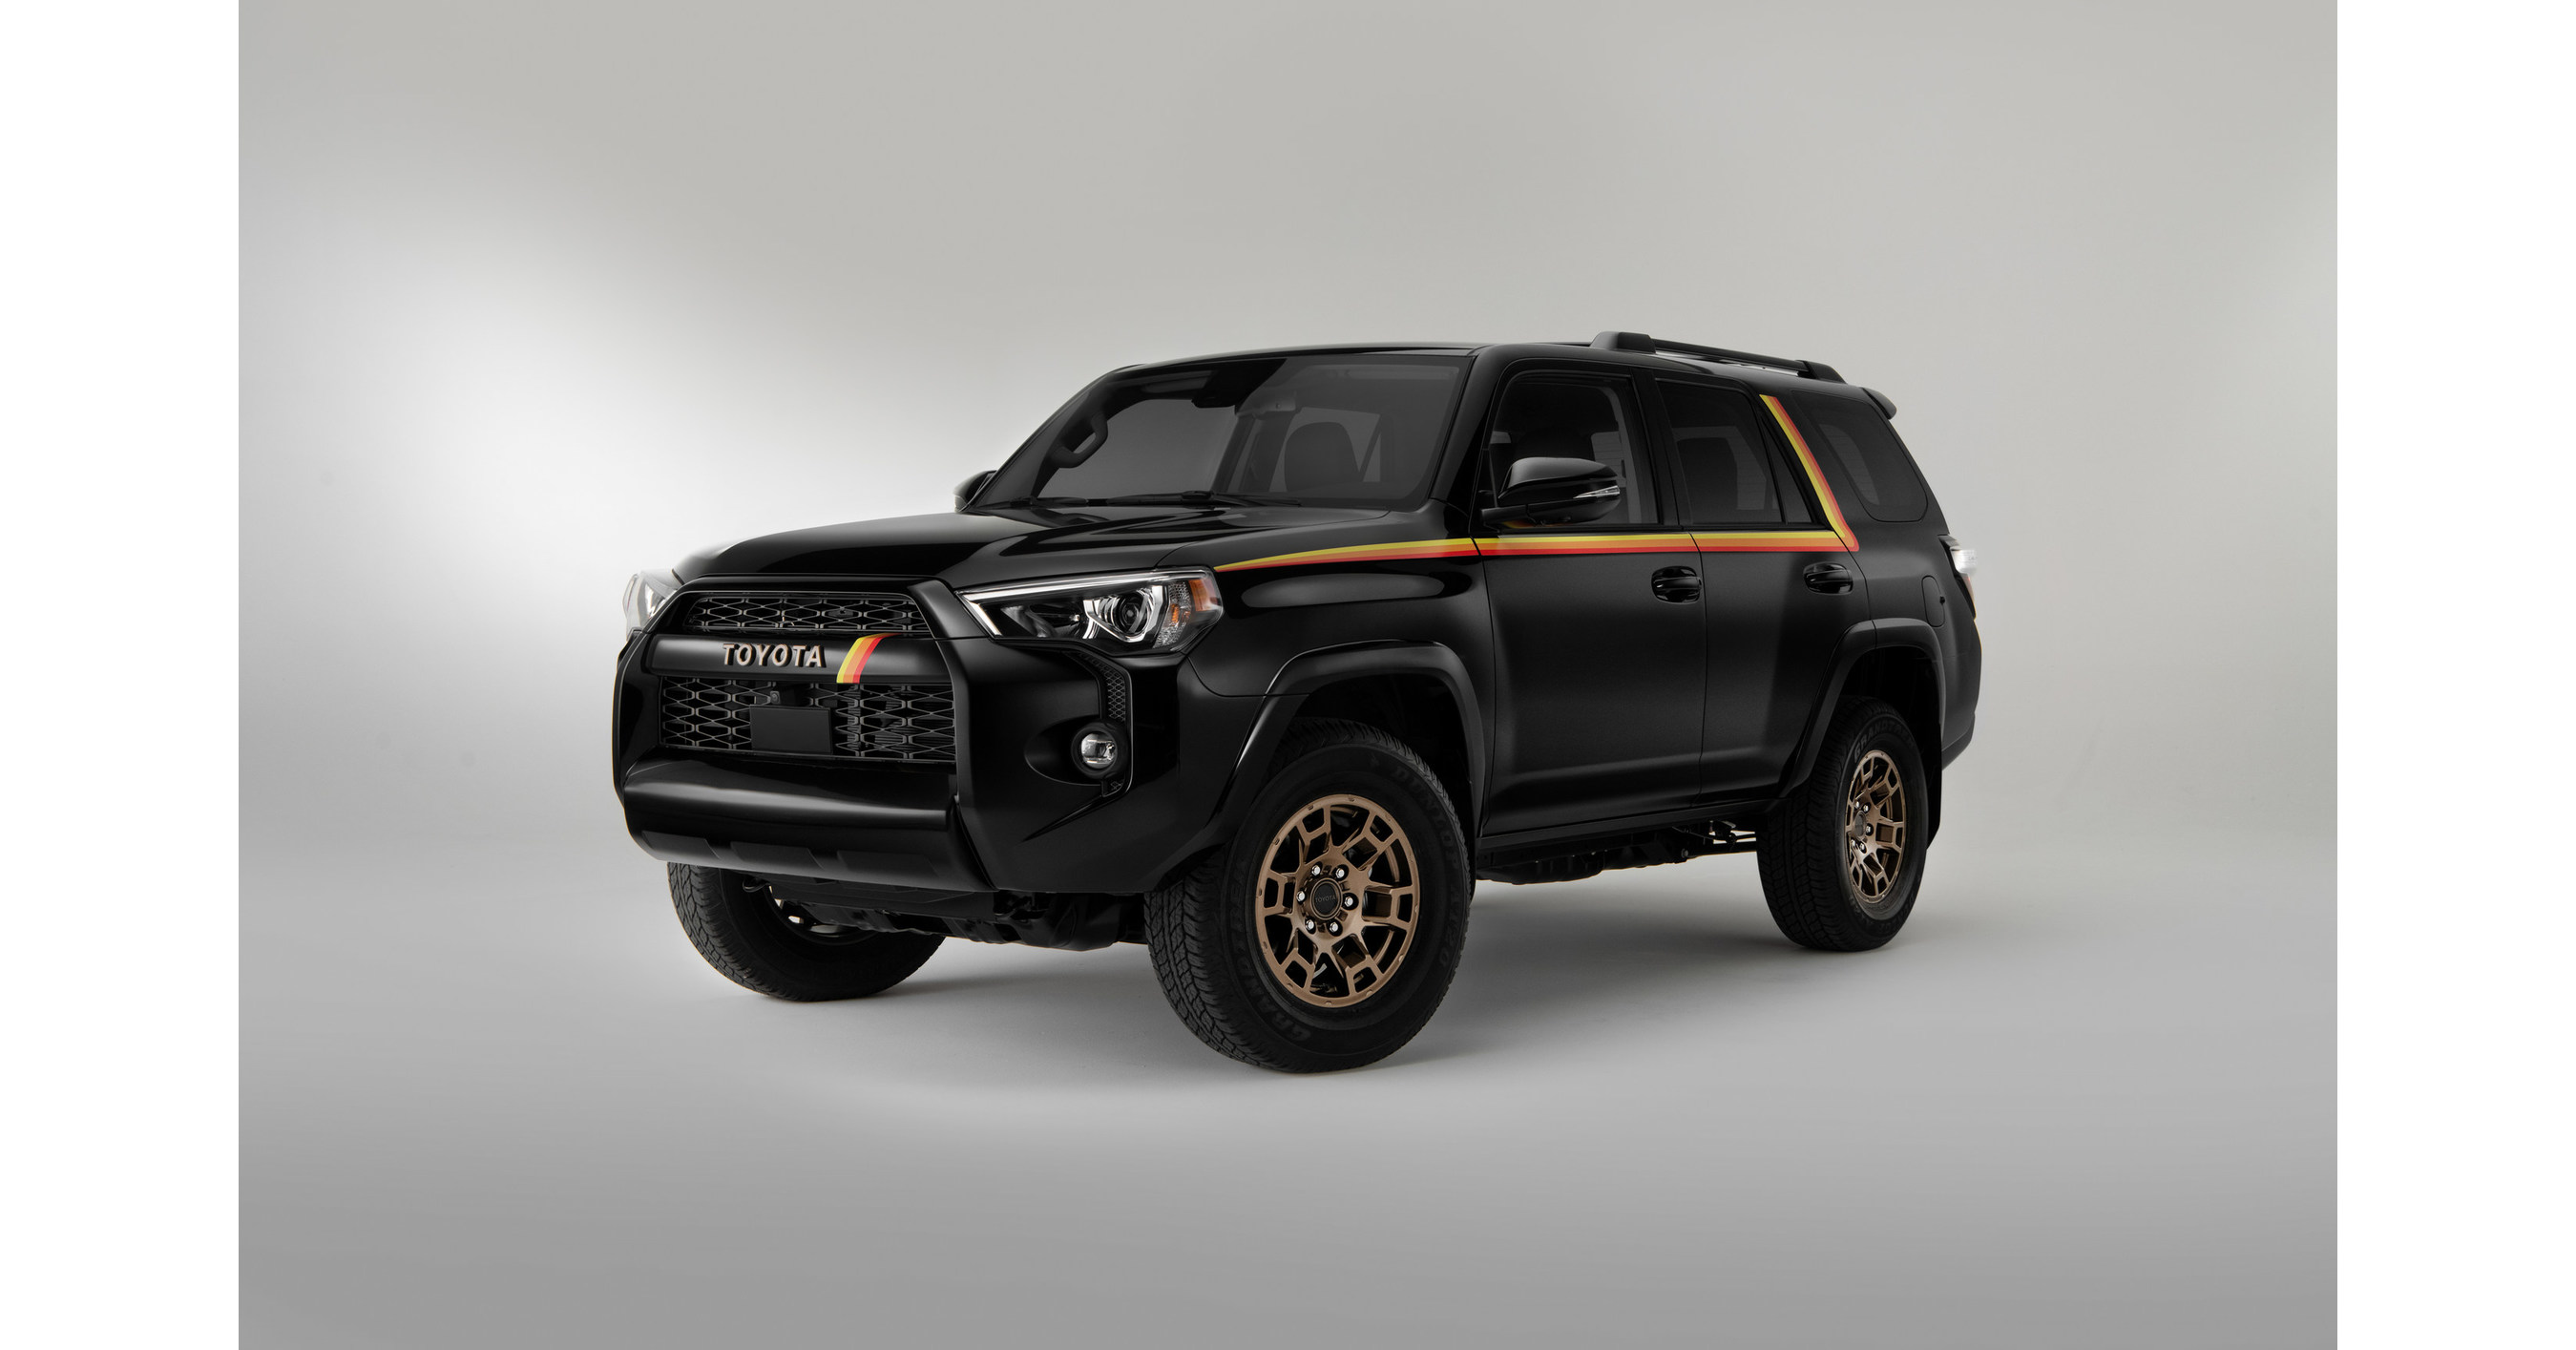 Kdss 4Runner: Unleash the Power Within